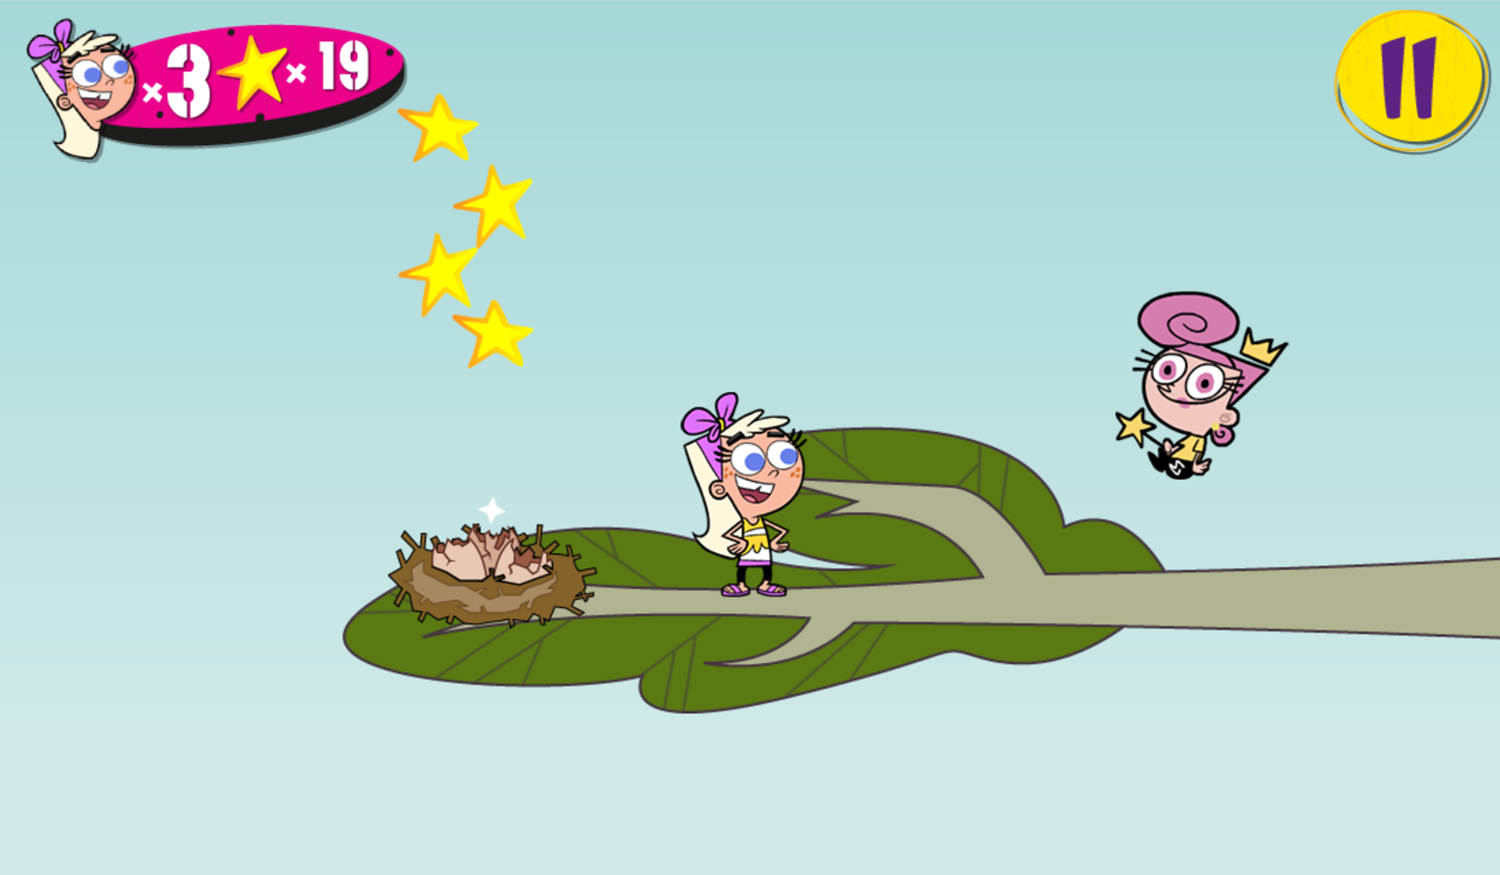 The Fairly OddParents The Fairly odd Squad Game Earth World Screenshot.